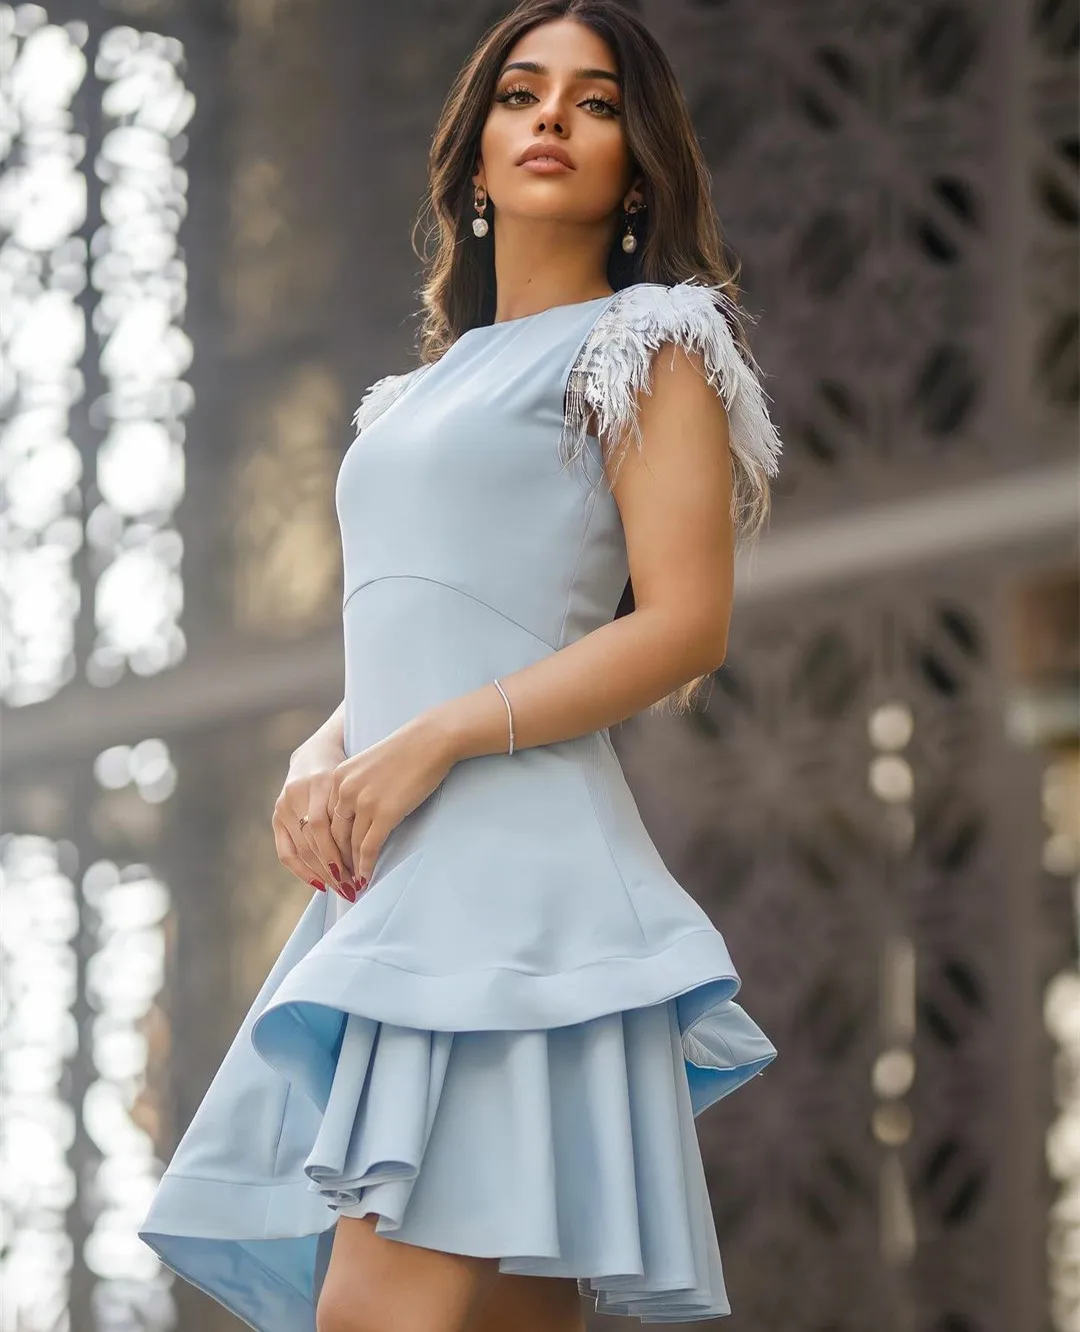 

Vintage Short Crepe Evening Dresses WIth Feathers A-Line Ruffled Knee Length إفننغ دريسس Robes de Soirée for Women